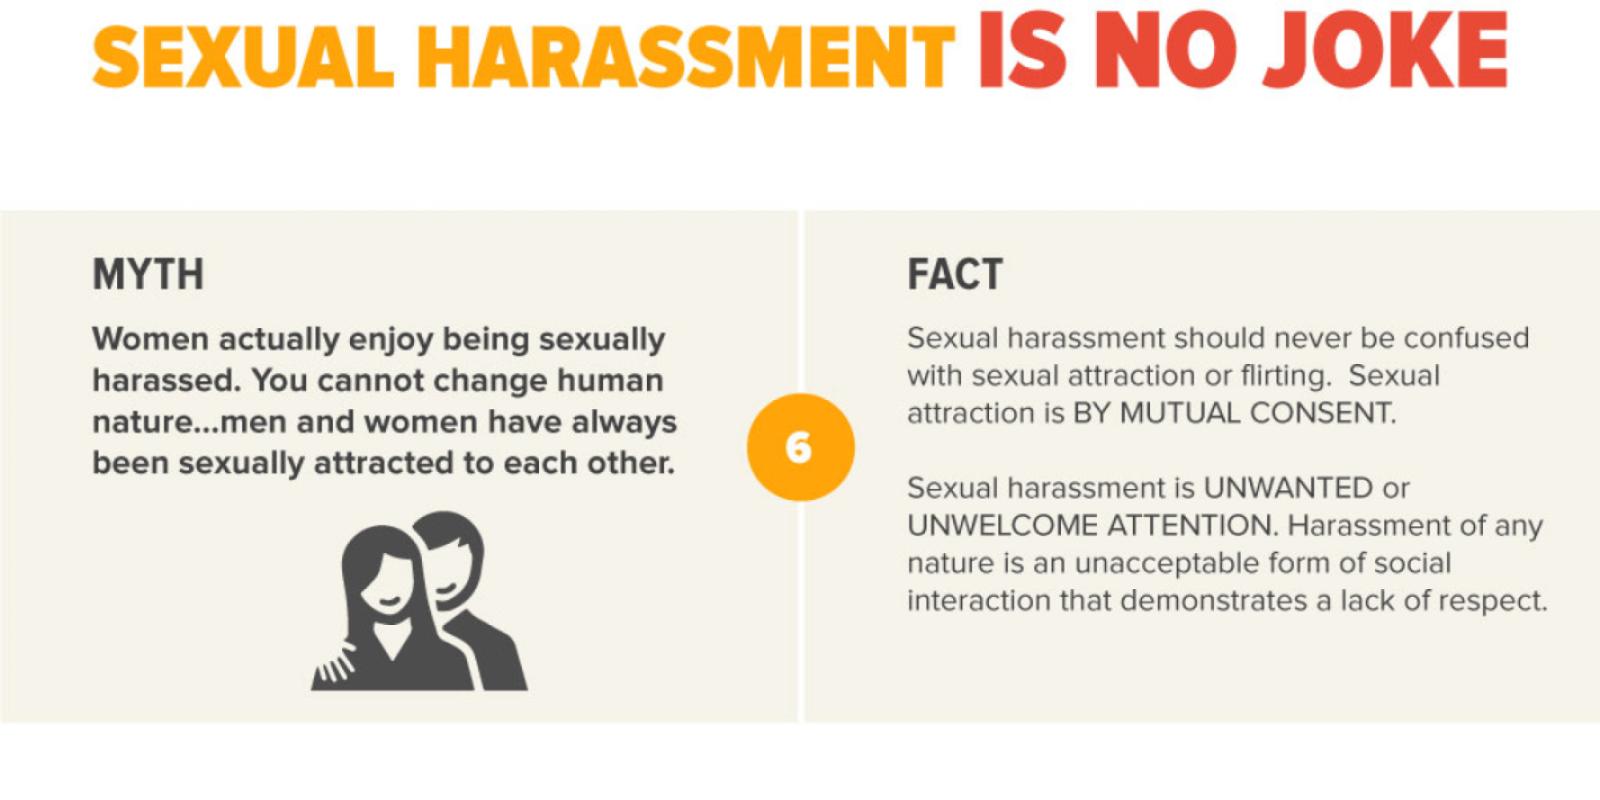 MYTH Women actually enjoy being sexually harassed. You cannot change human nature…men and women have always been sexually attracted to each other.   FACT Sexual harassment should never be confused with sexual attraction or flirting.  Sexual attraction is BY MUTUAL CONSENT.  Sexual harassment is UNWANTED or UNWELCOME ATTENTION. Harassment of any nature is an unacceptable form of social interaction that demonstrates a lack of respect.